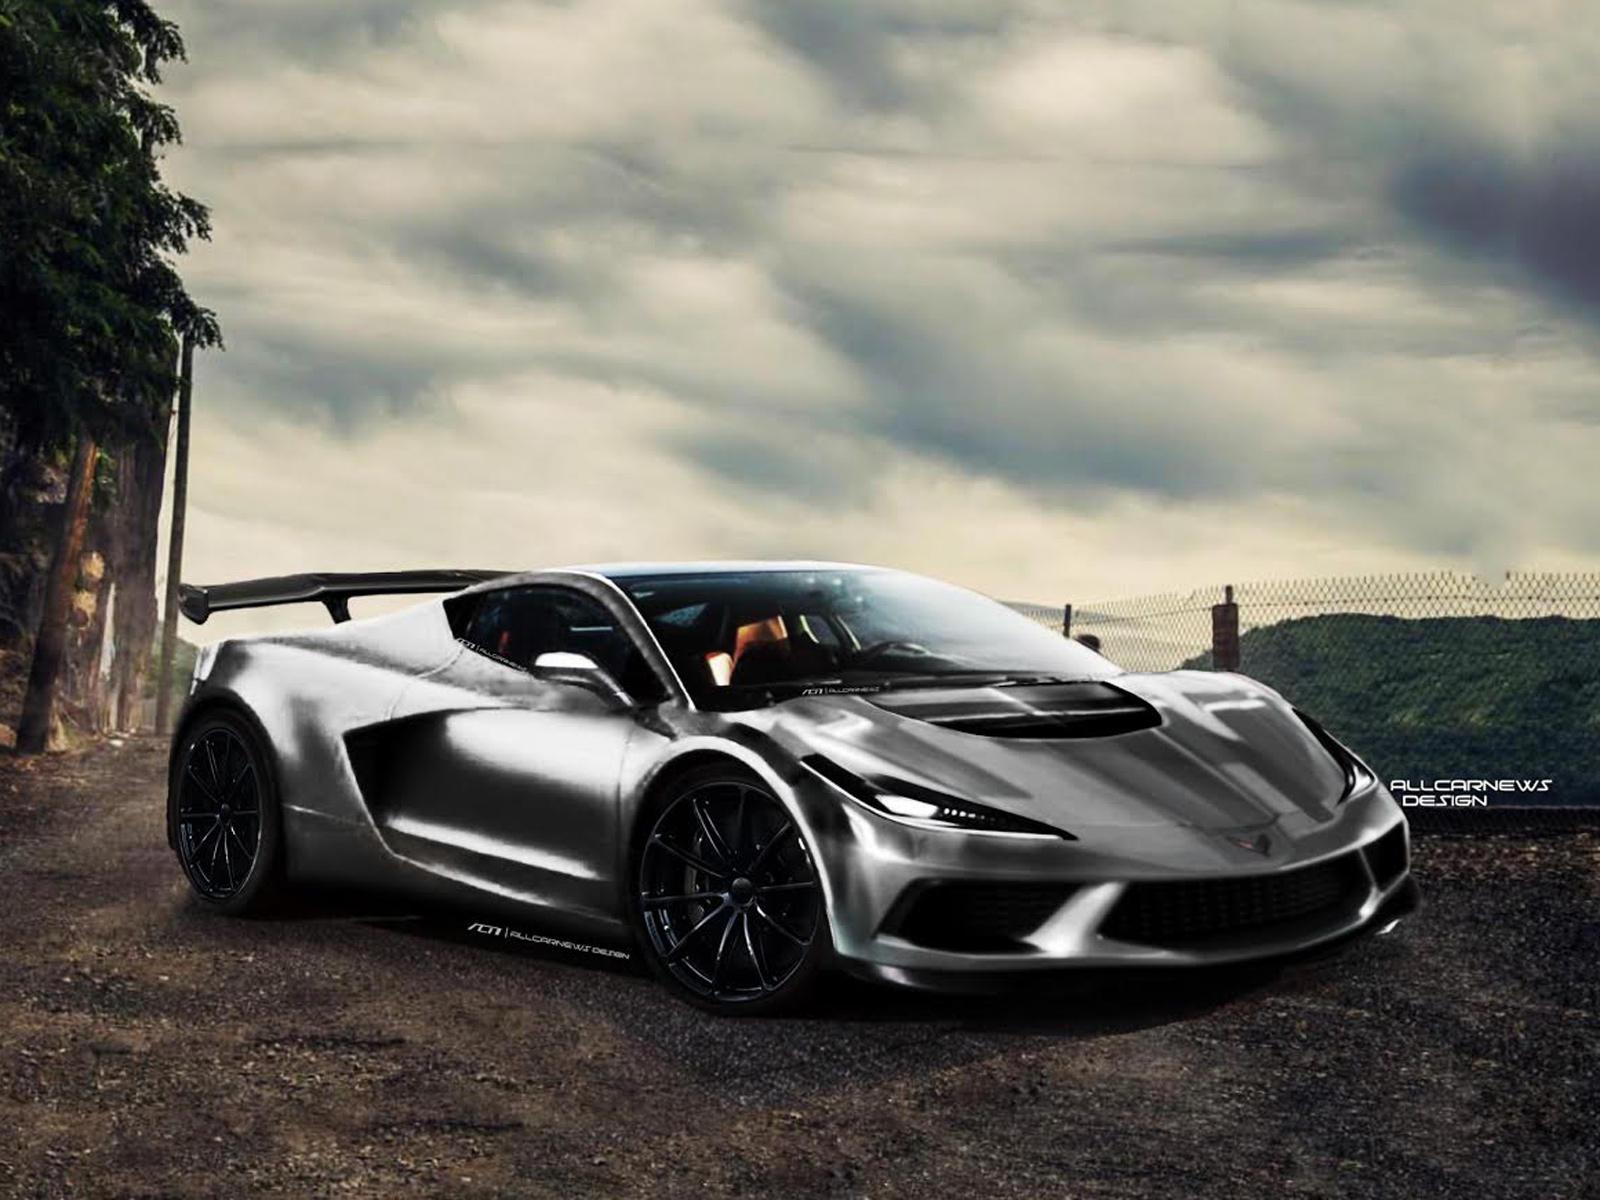 Here's Another Stunning C8 Corvette Rendering For Your